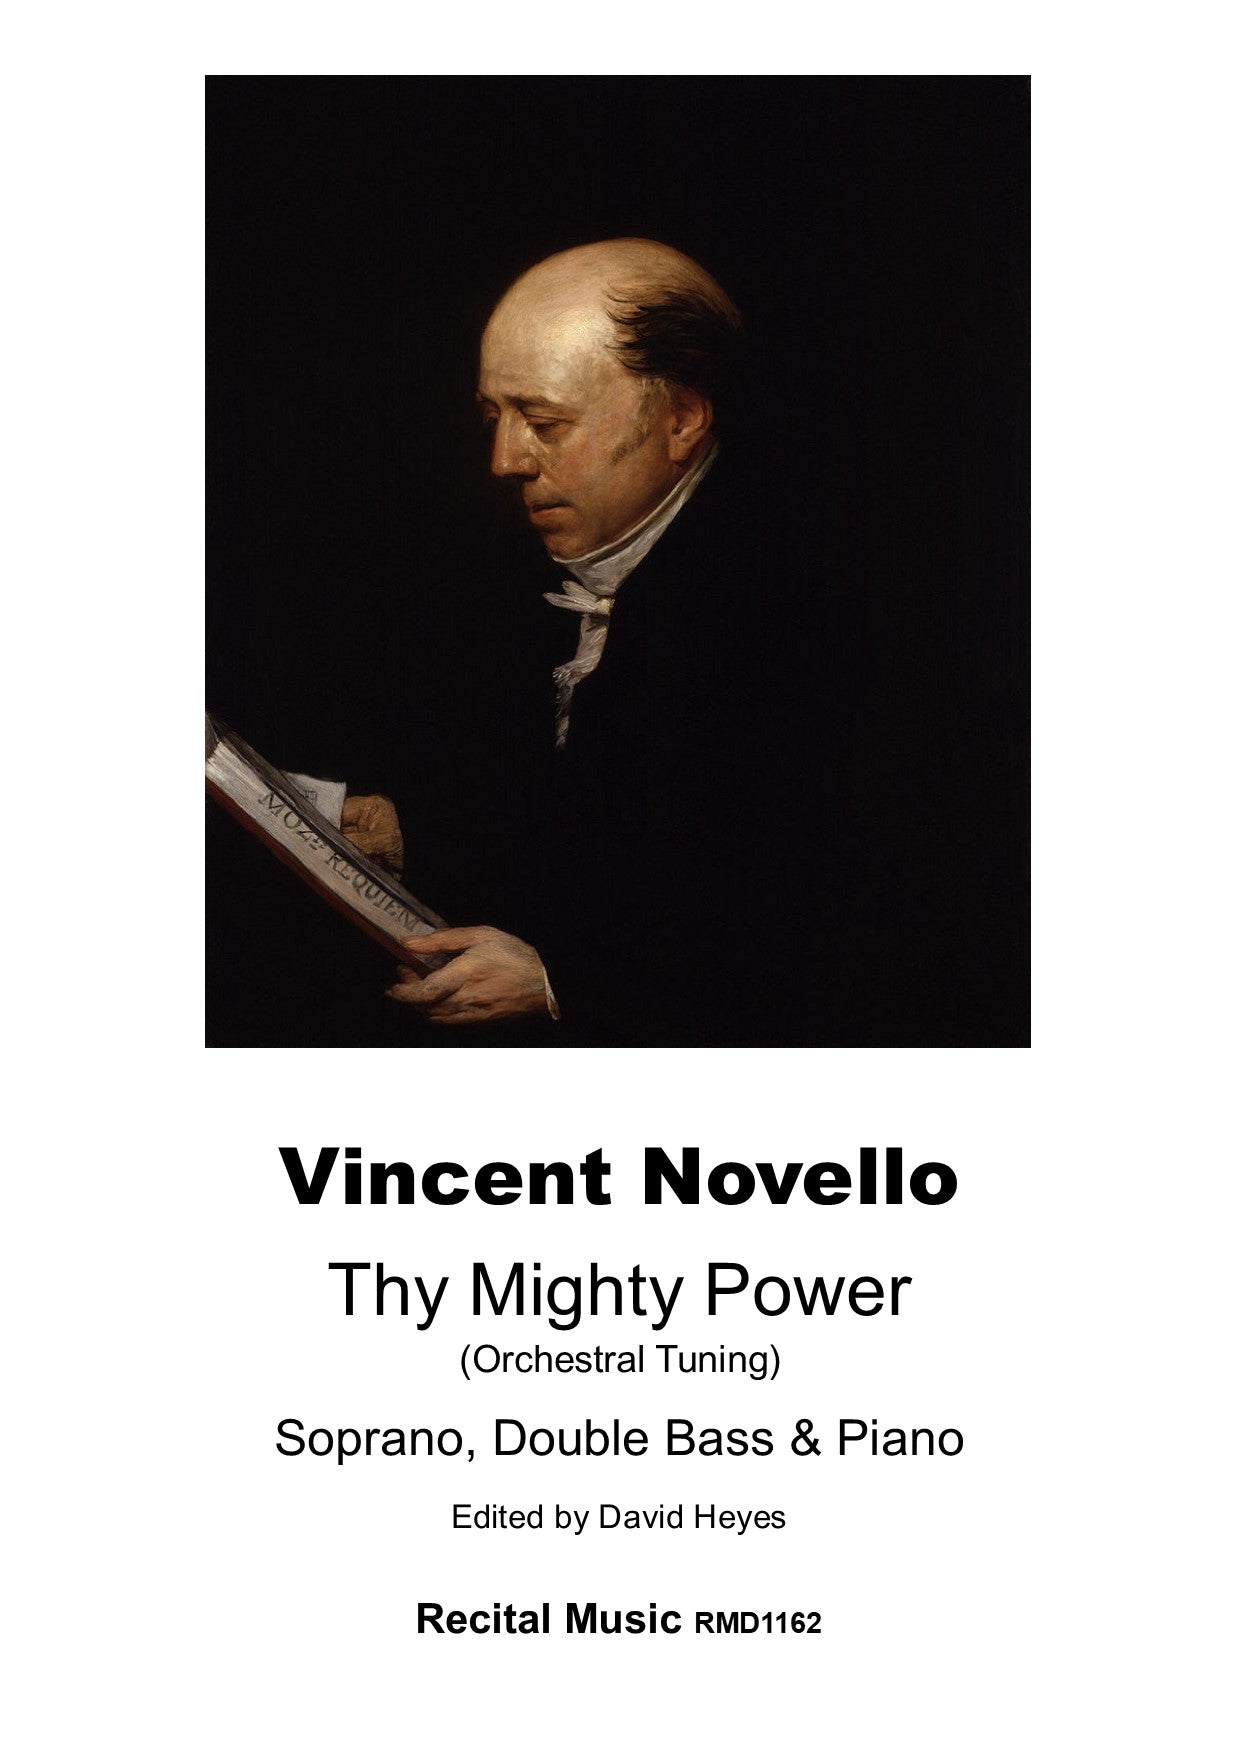 Vincent Novello: Thy Mighty Power for soprano, double bass & piano